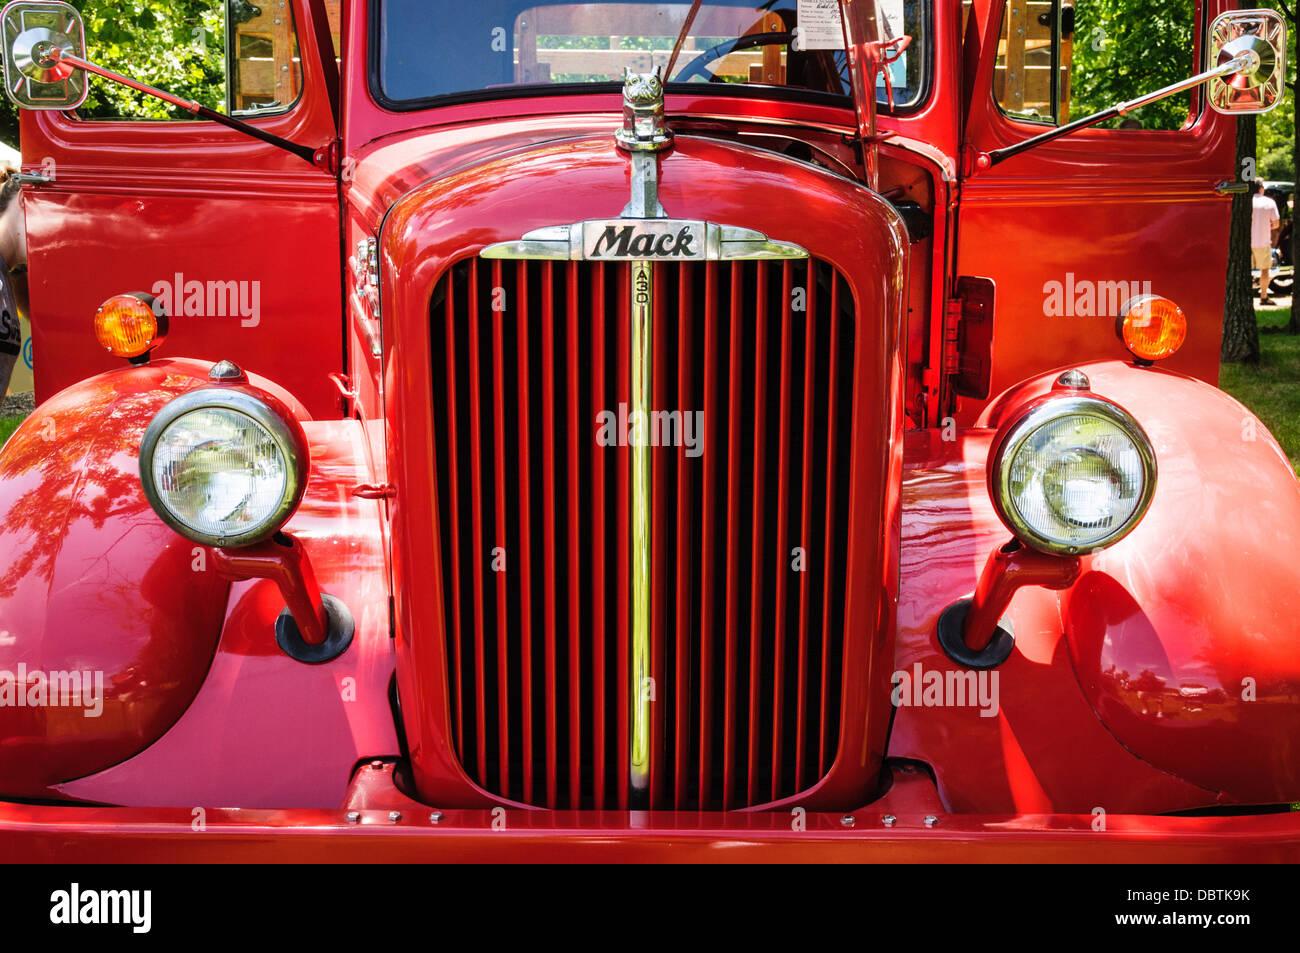 1951 Mack Truck, Antique Car Show, Sully Historic Site, Chantilly, Virginia Stock Photo